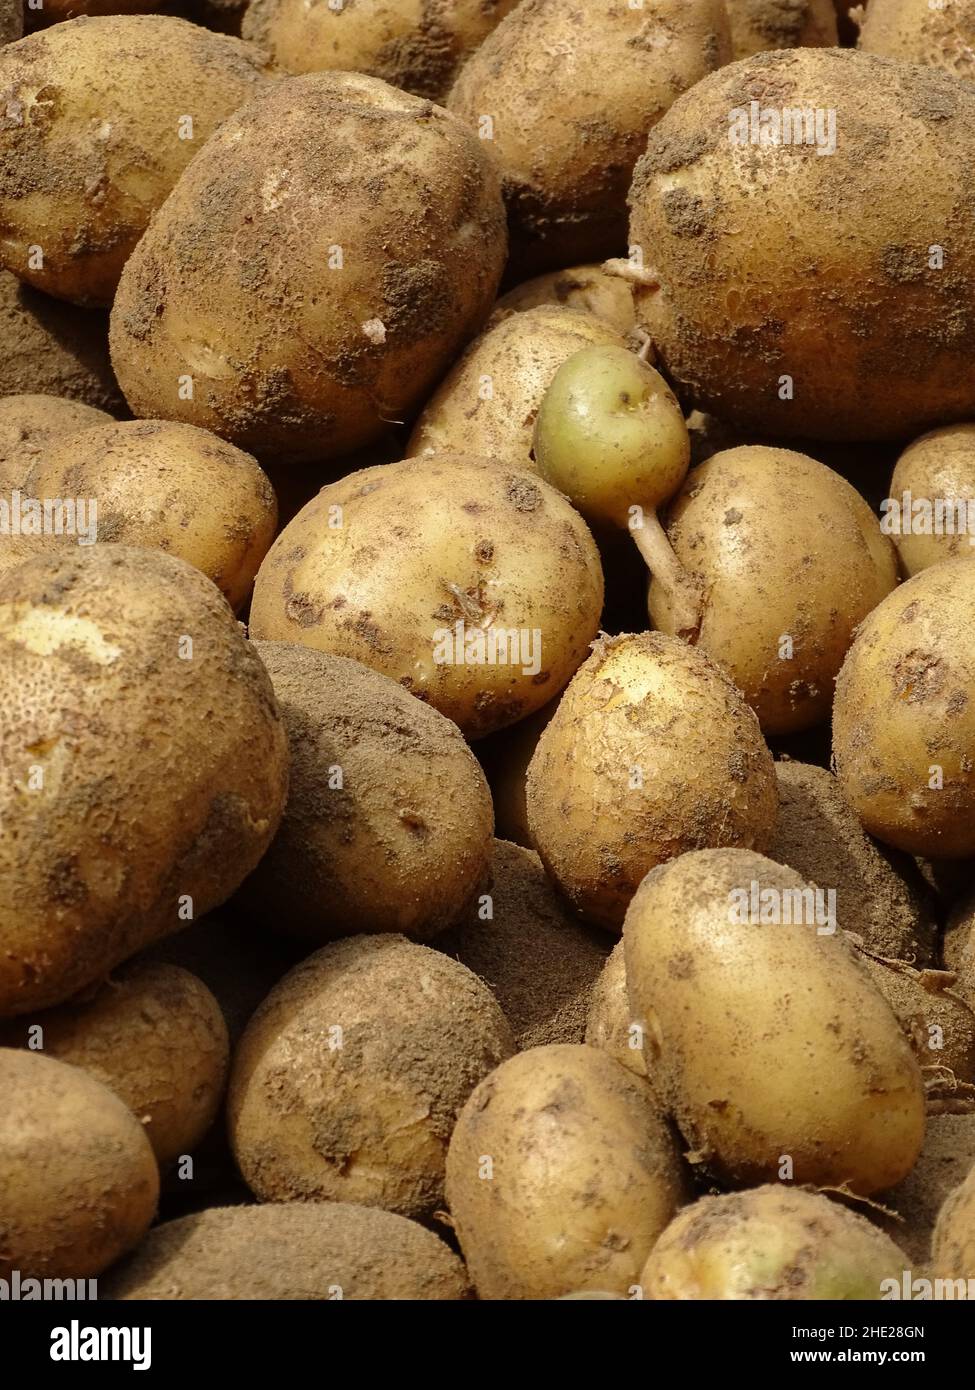 just harvested tasty potatoes from the vegetable garden Stock Photo